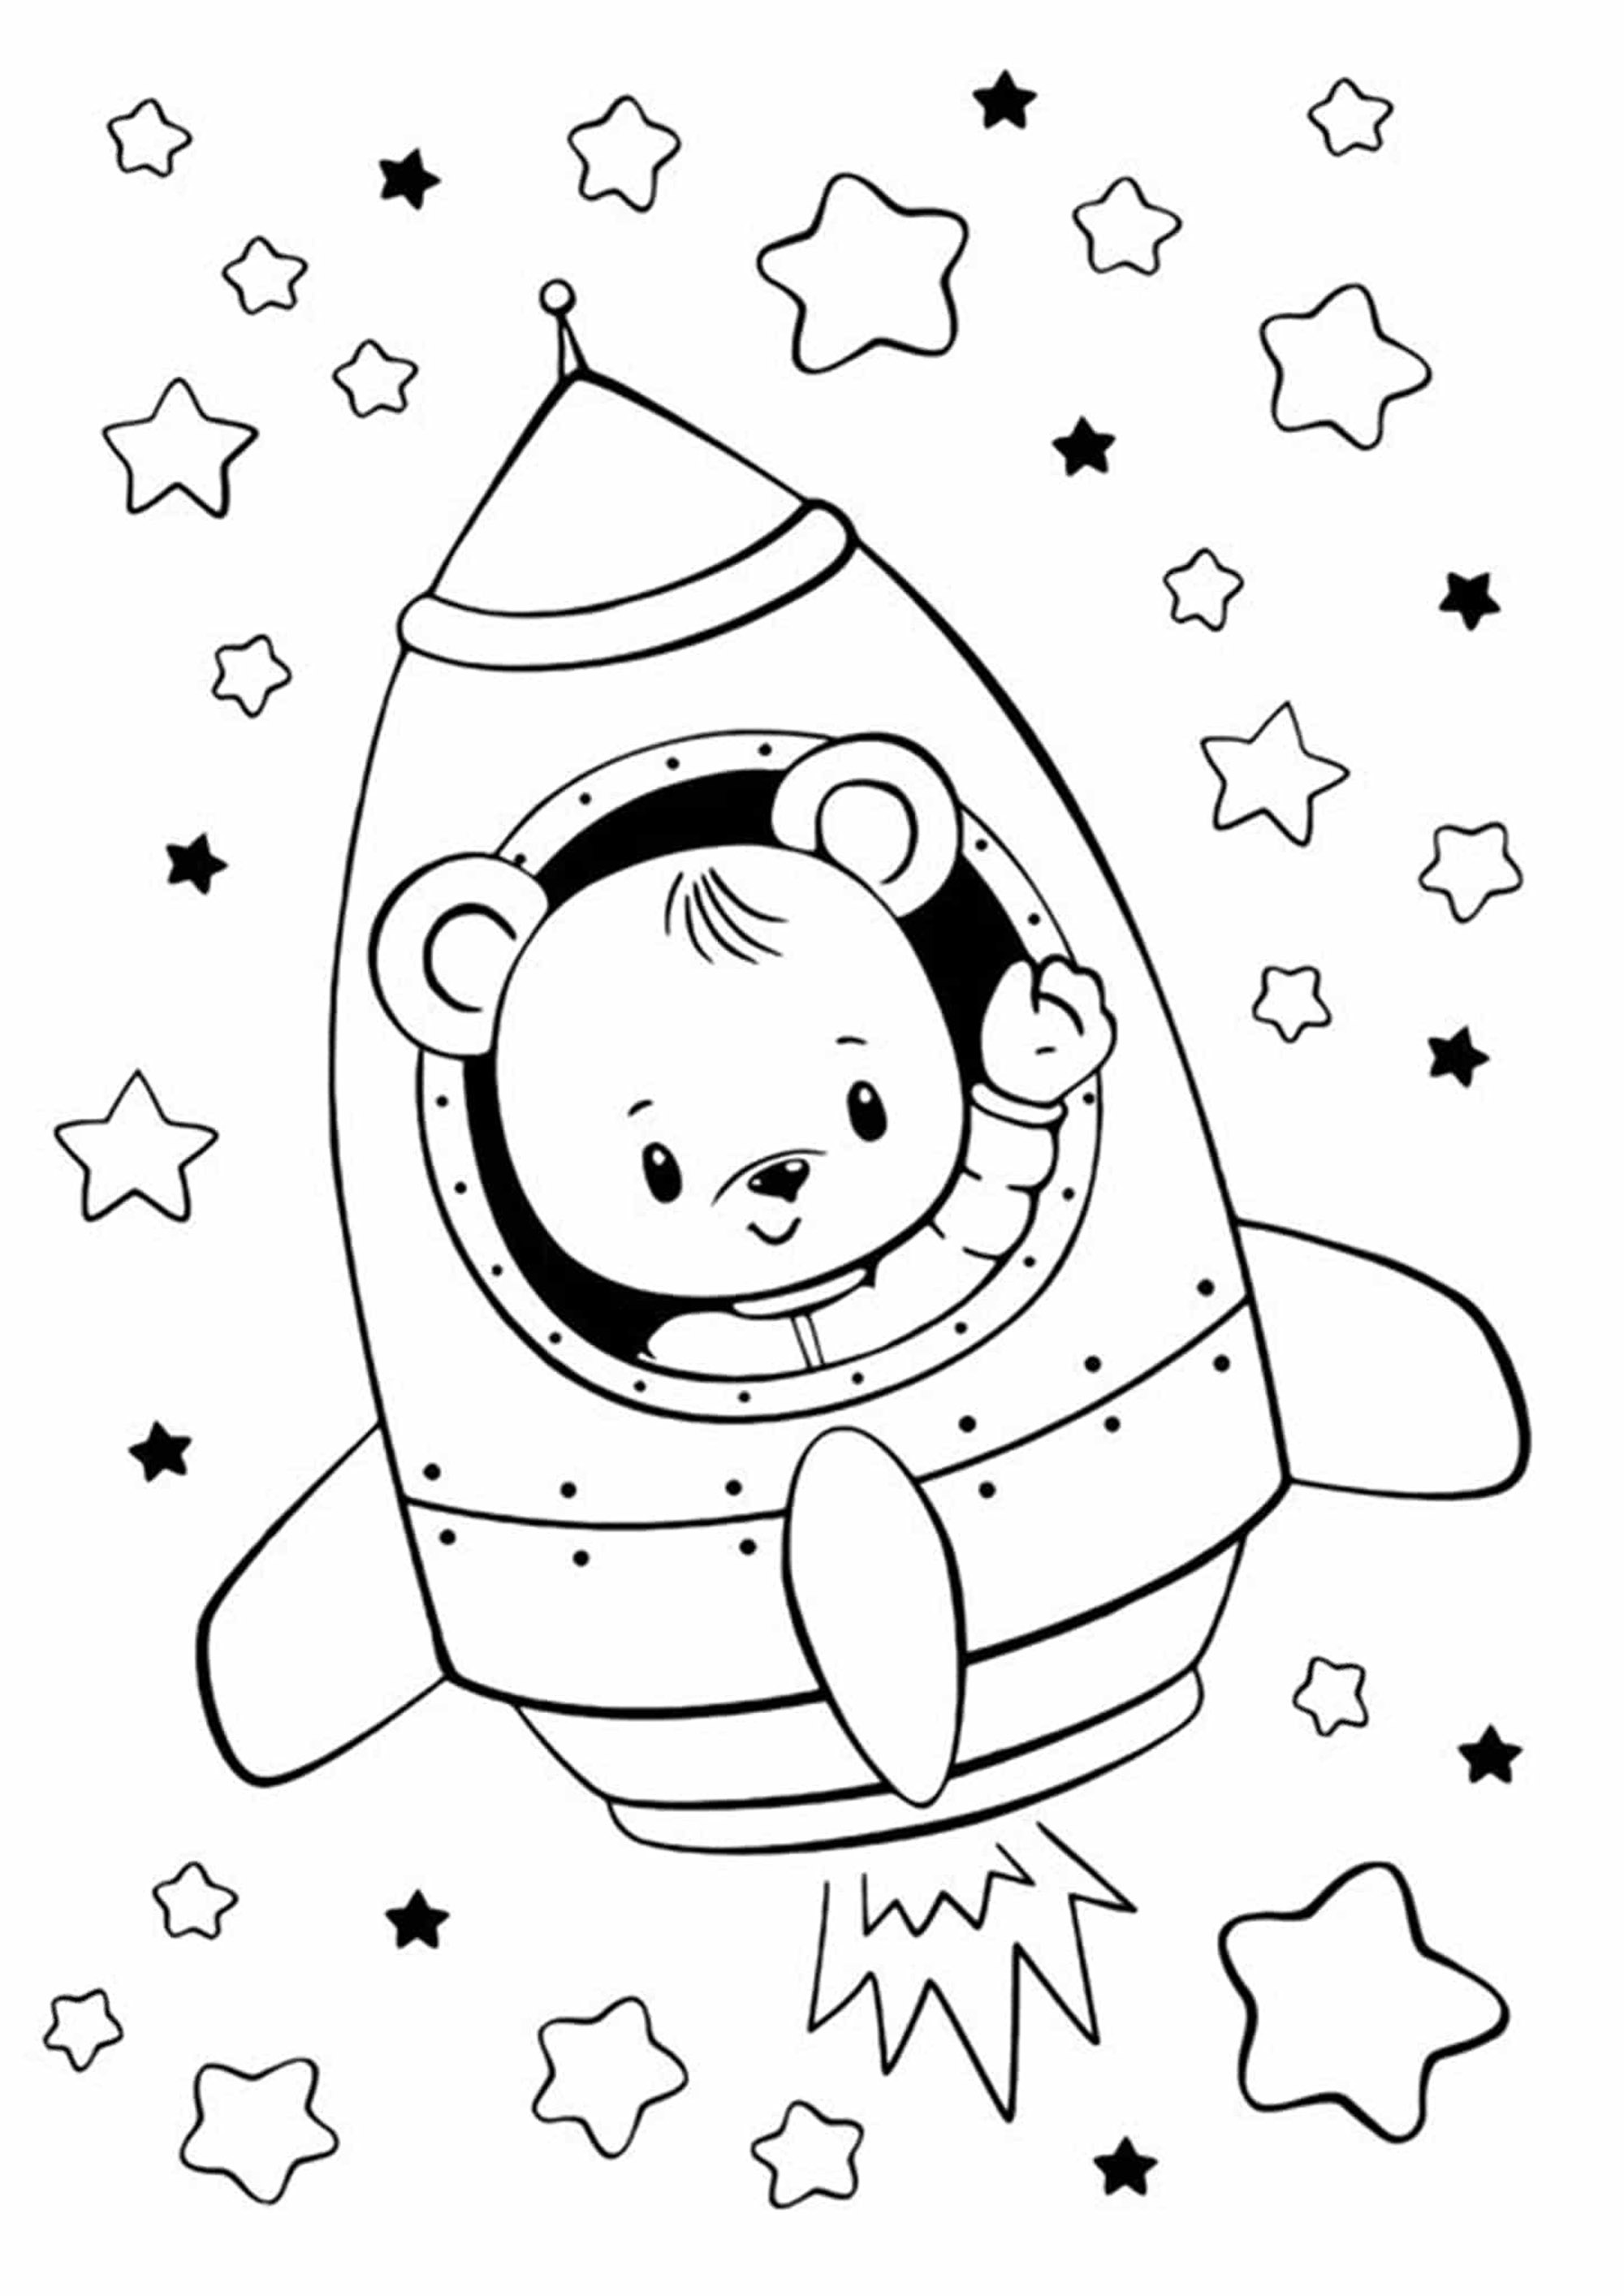 Little bear in a rocket, ready to explore space